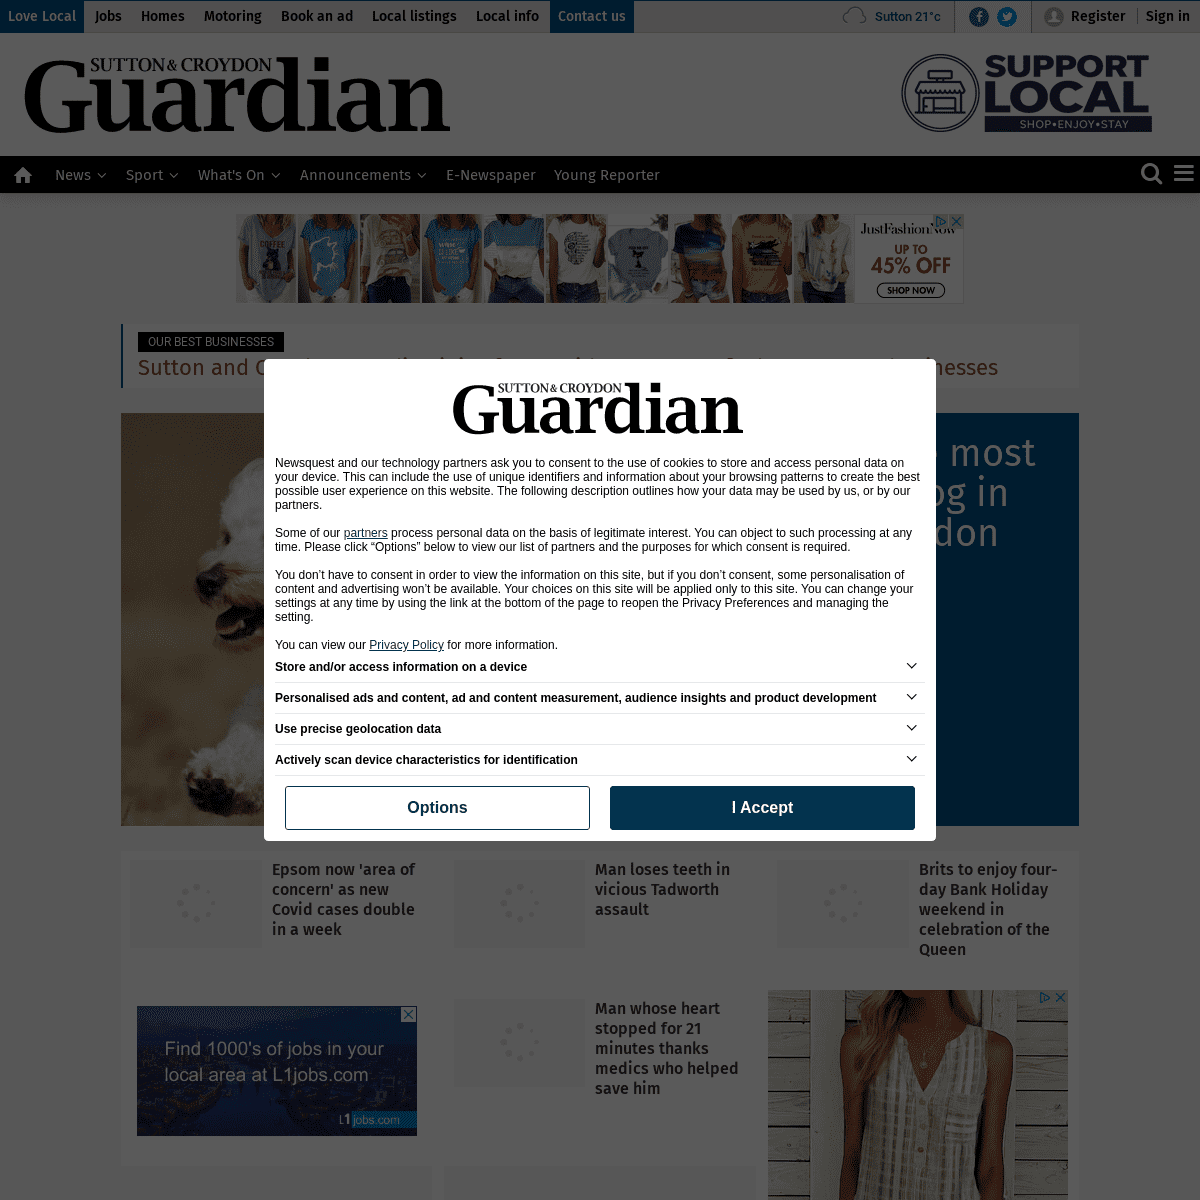 A complete backup of https://yourlocalguardian.co.uk